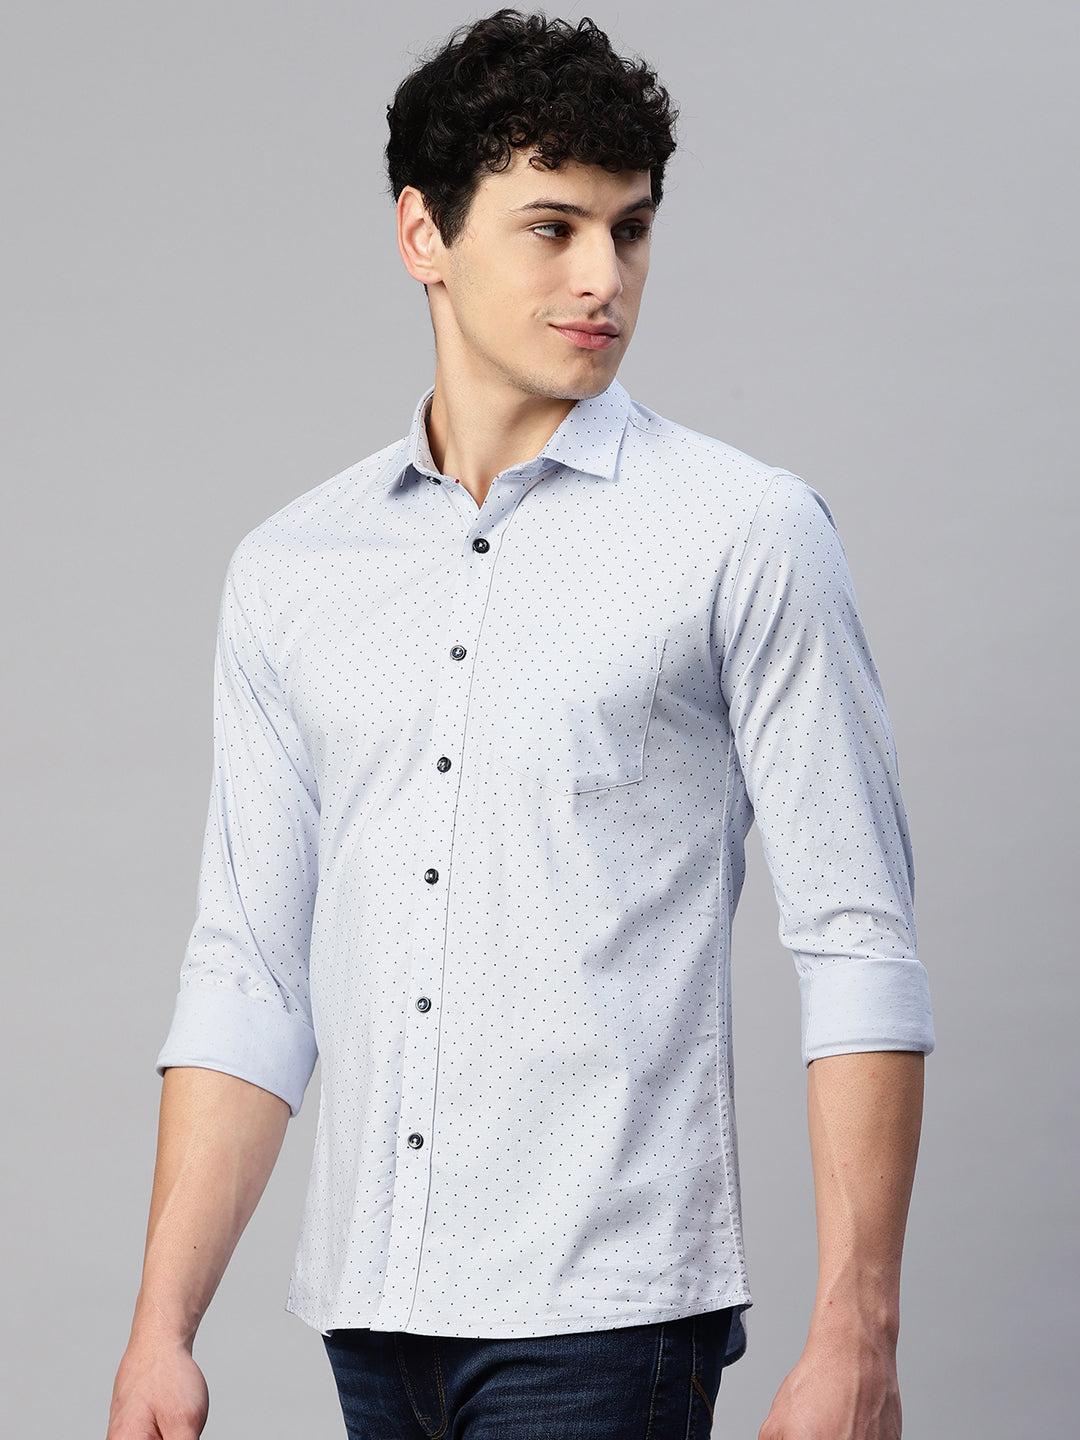 5thanfold Men's Casual  Pure Cotton Lycra (Stretch) Full Sleeve Polka Print Sky Blue Slim Fit Shirt